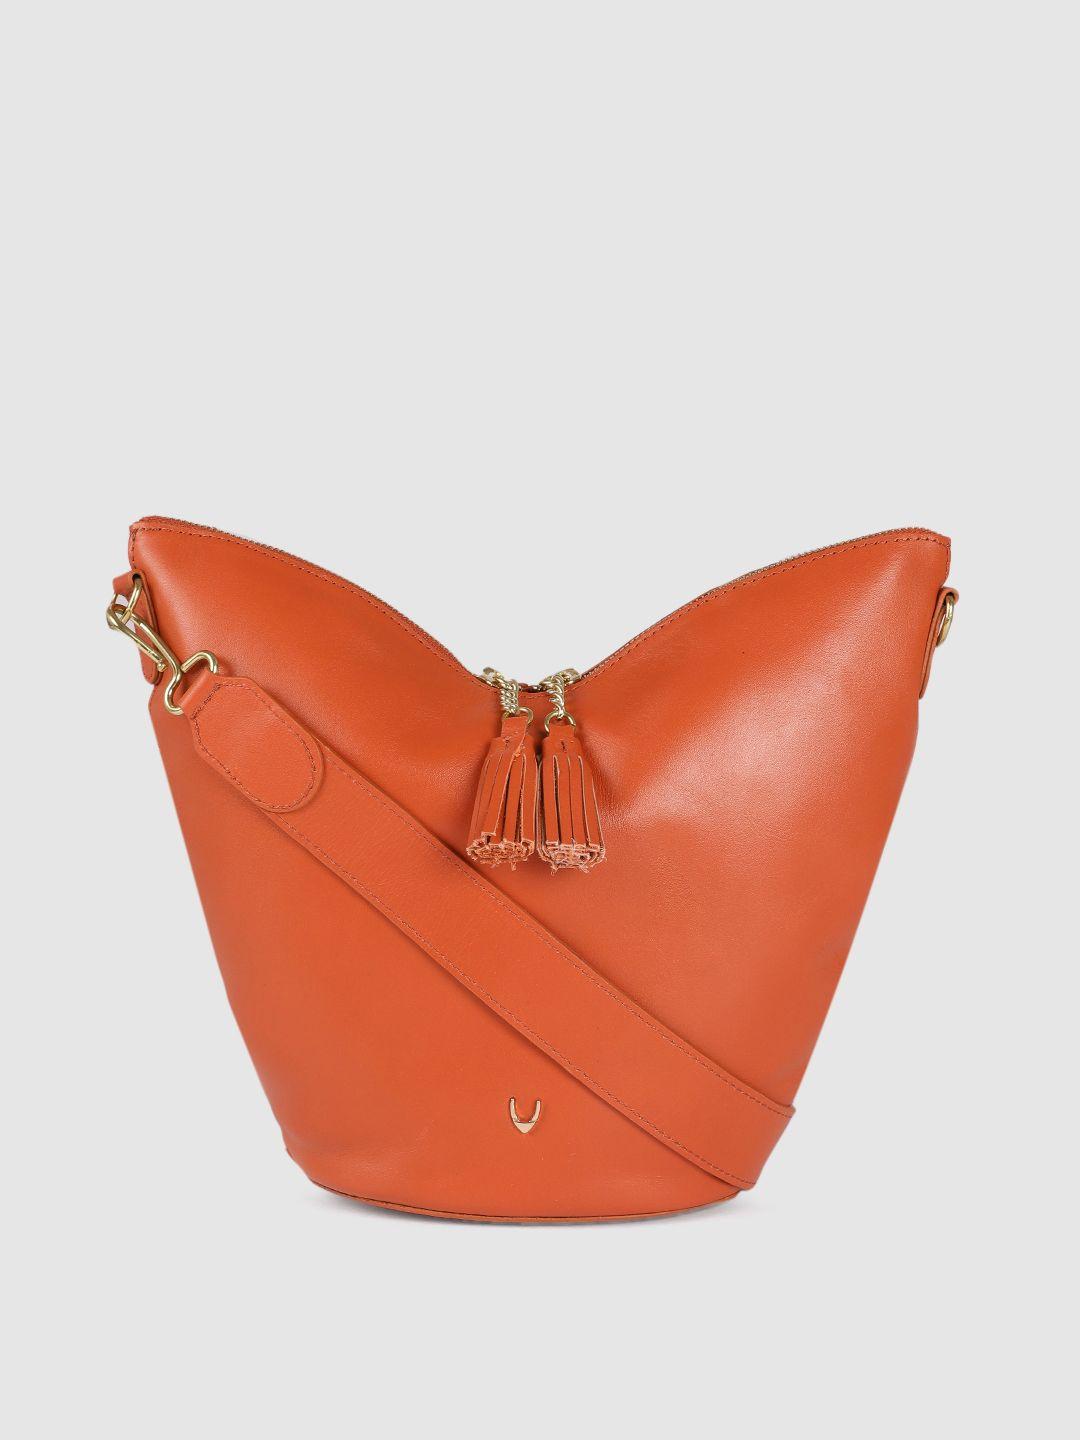 hidesign orange solid leather structured hobo bag with tasselled